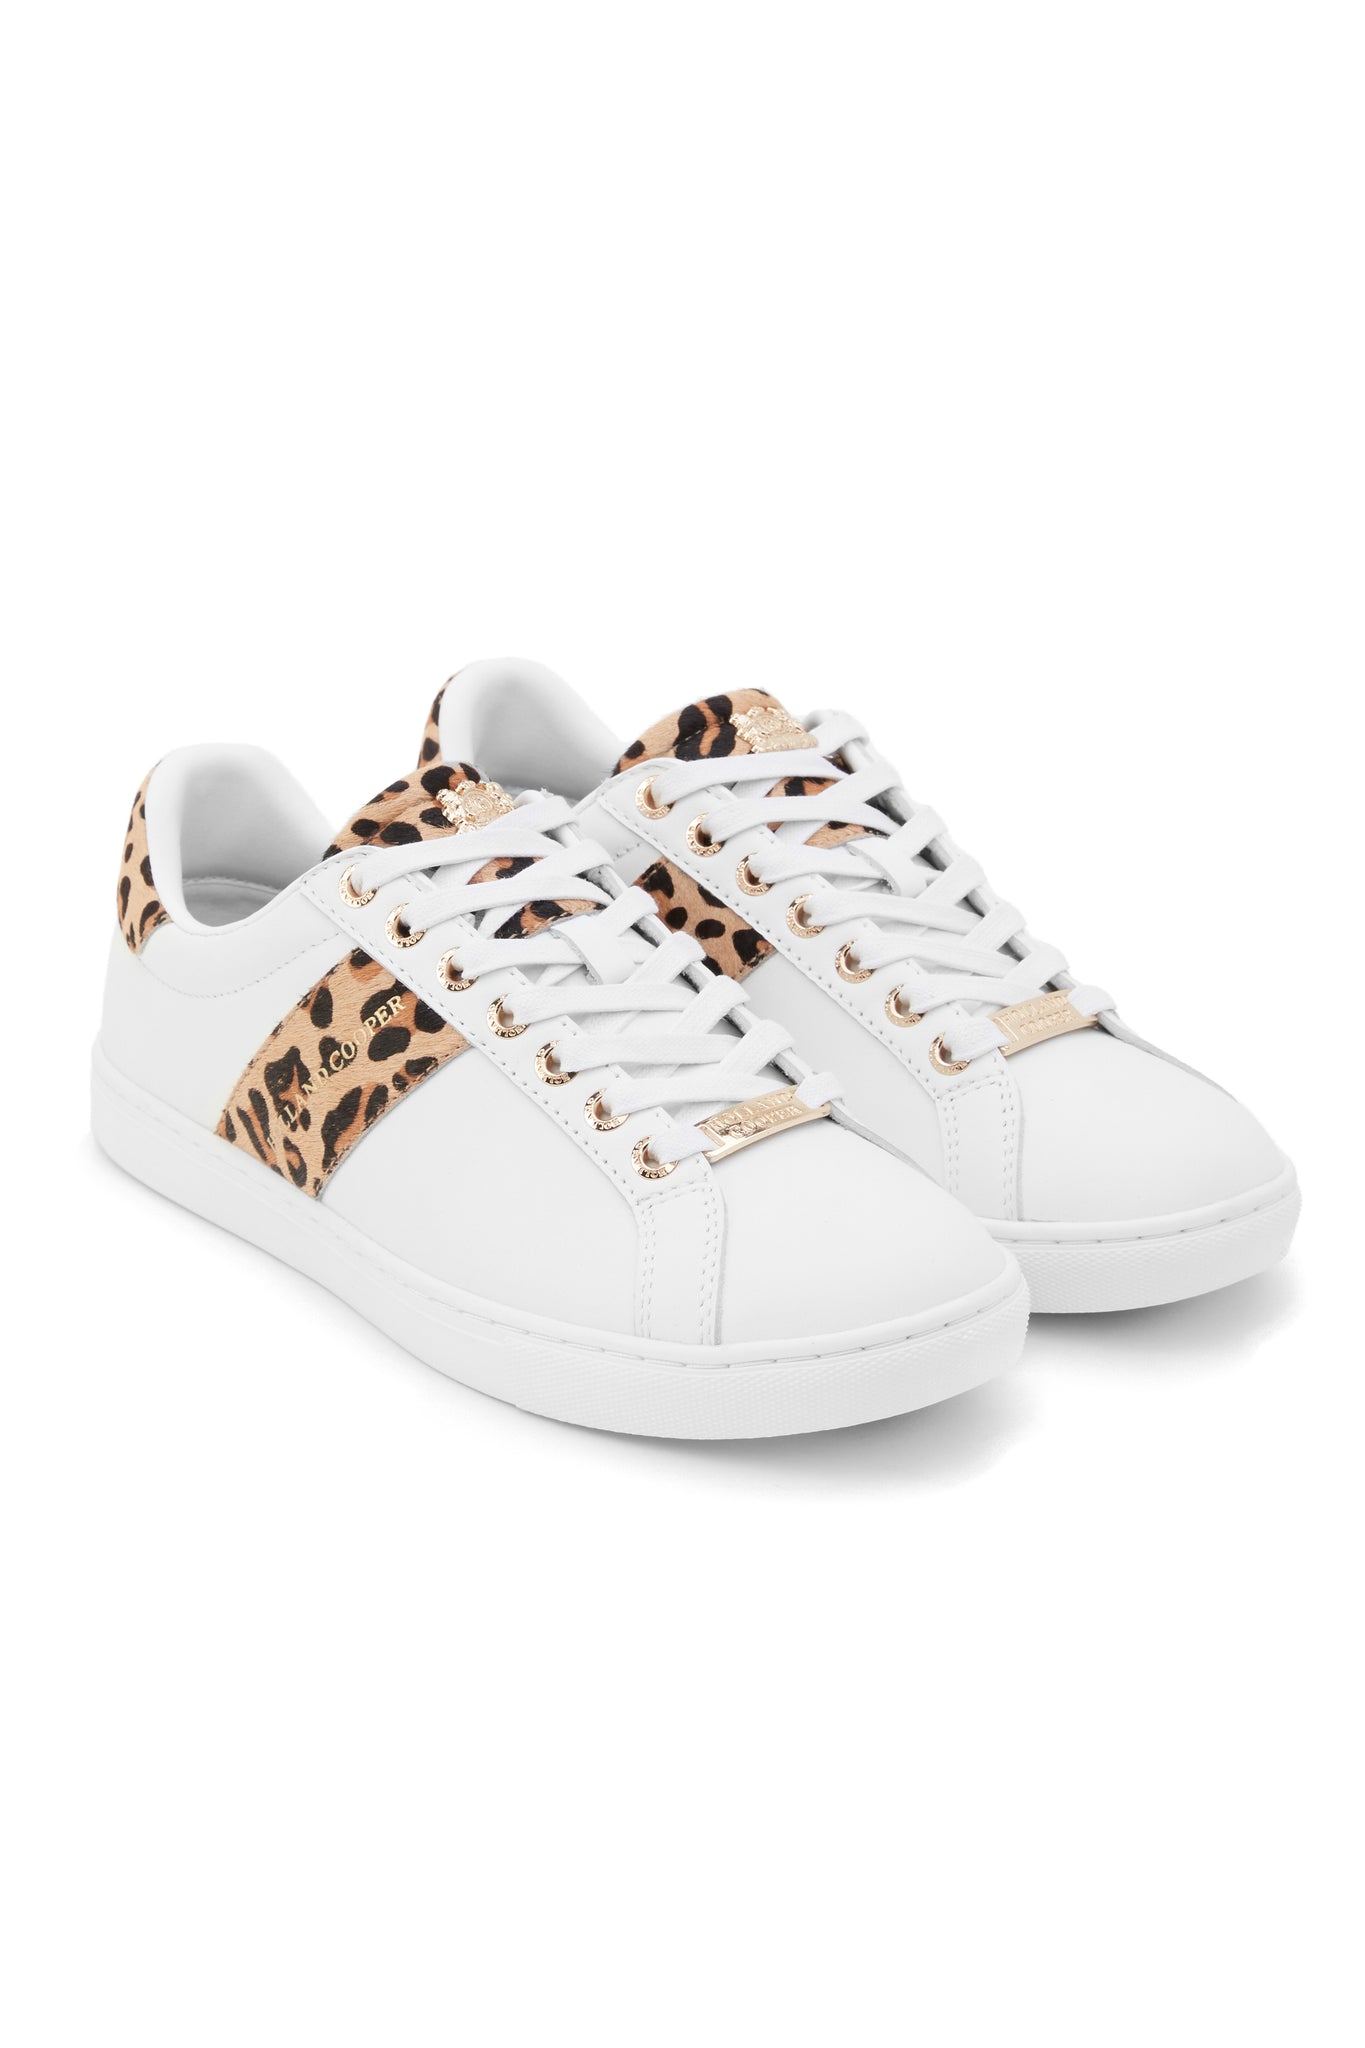 white leather trainers with white laces detailed with a diagonal stripe of leopard print on the side with gold foil branding and a leopard print heel and tongue with gold hardware